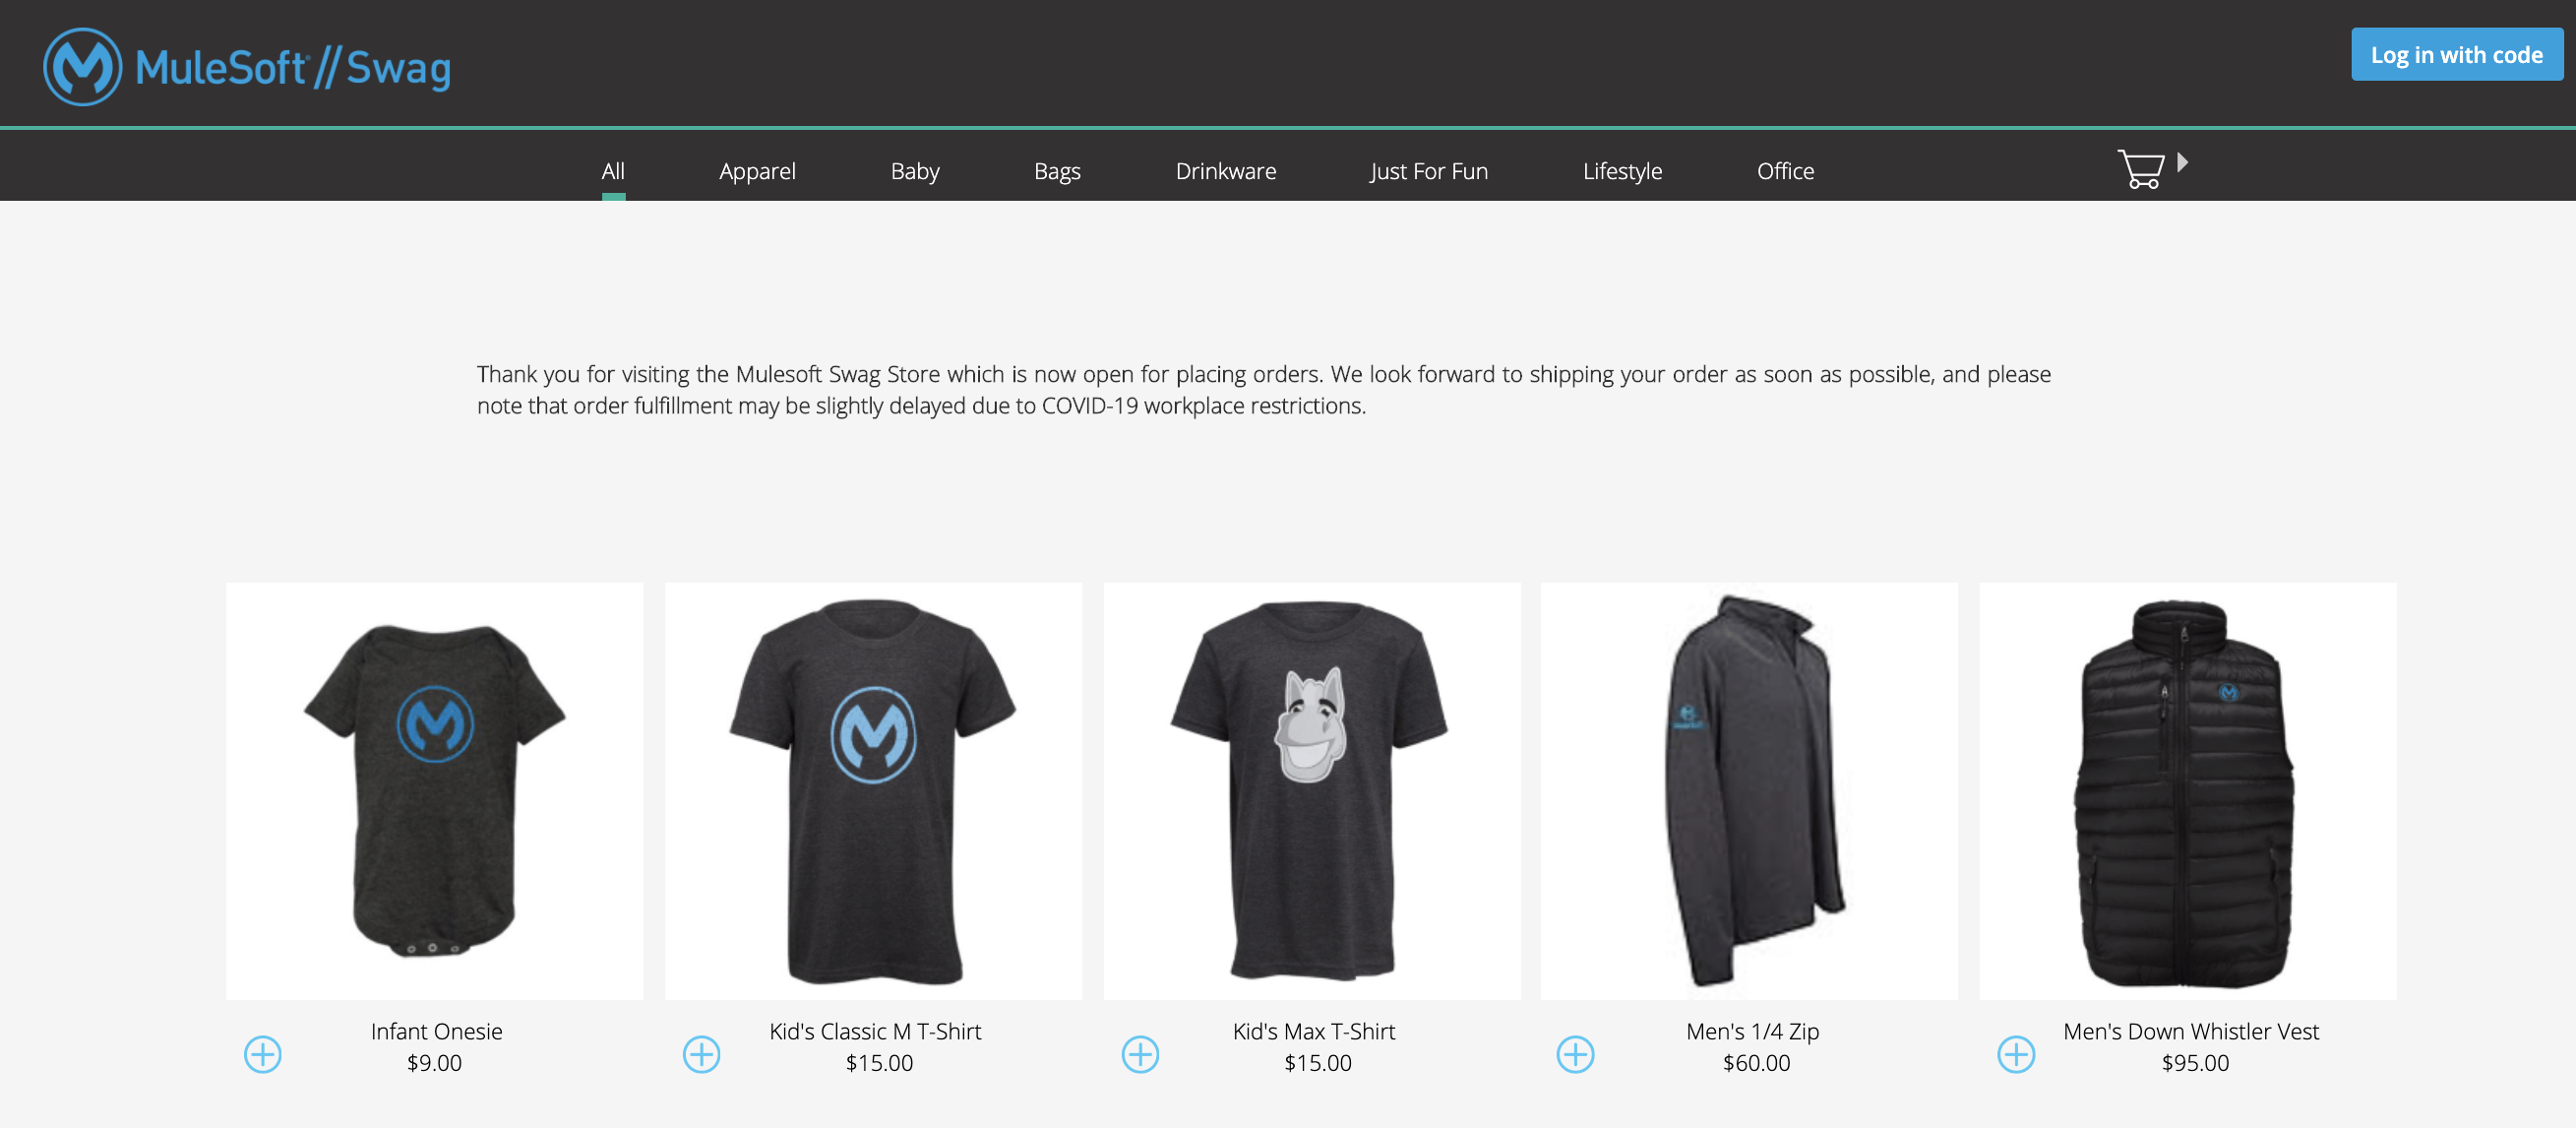 mulesoft's online company store